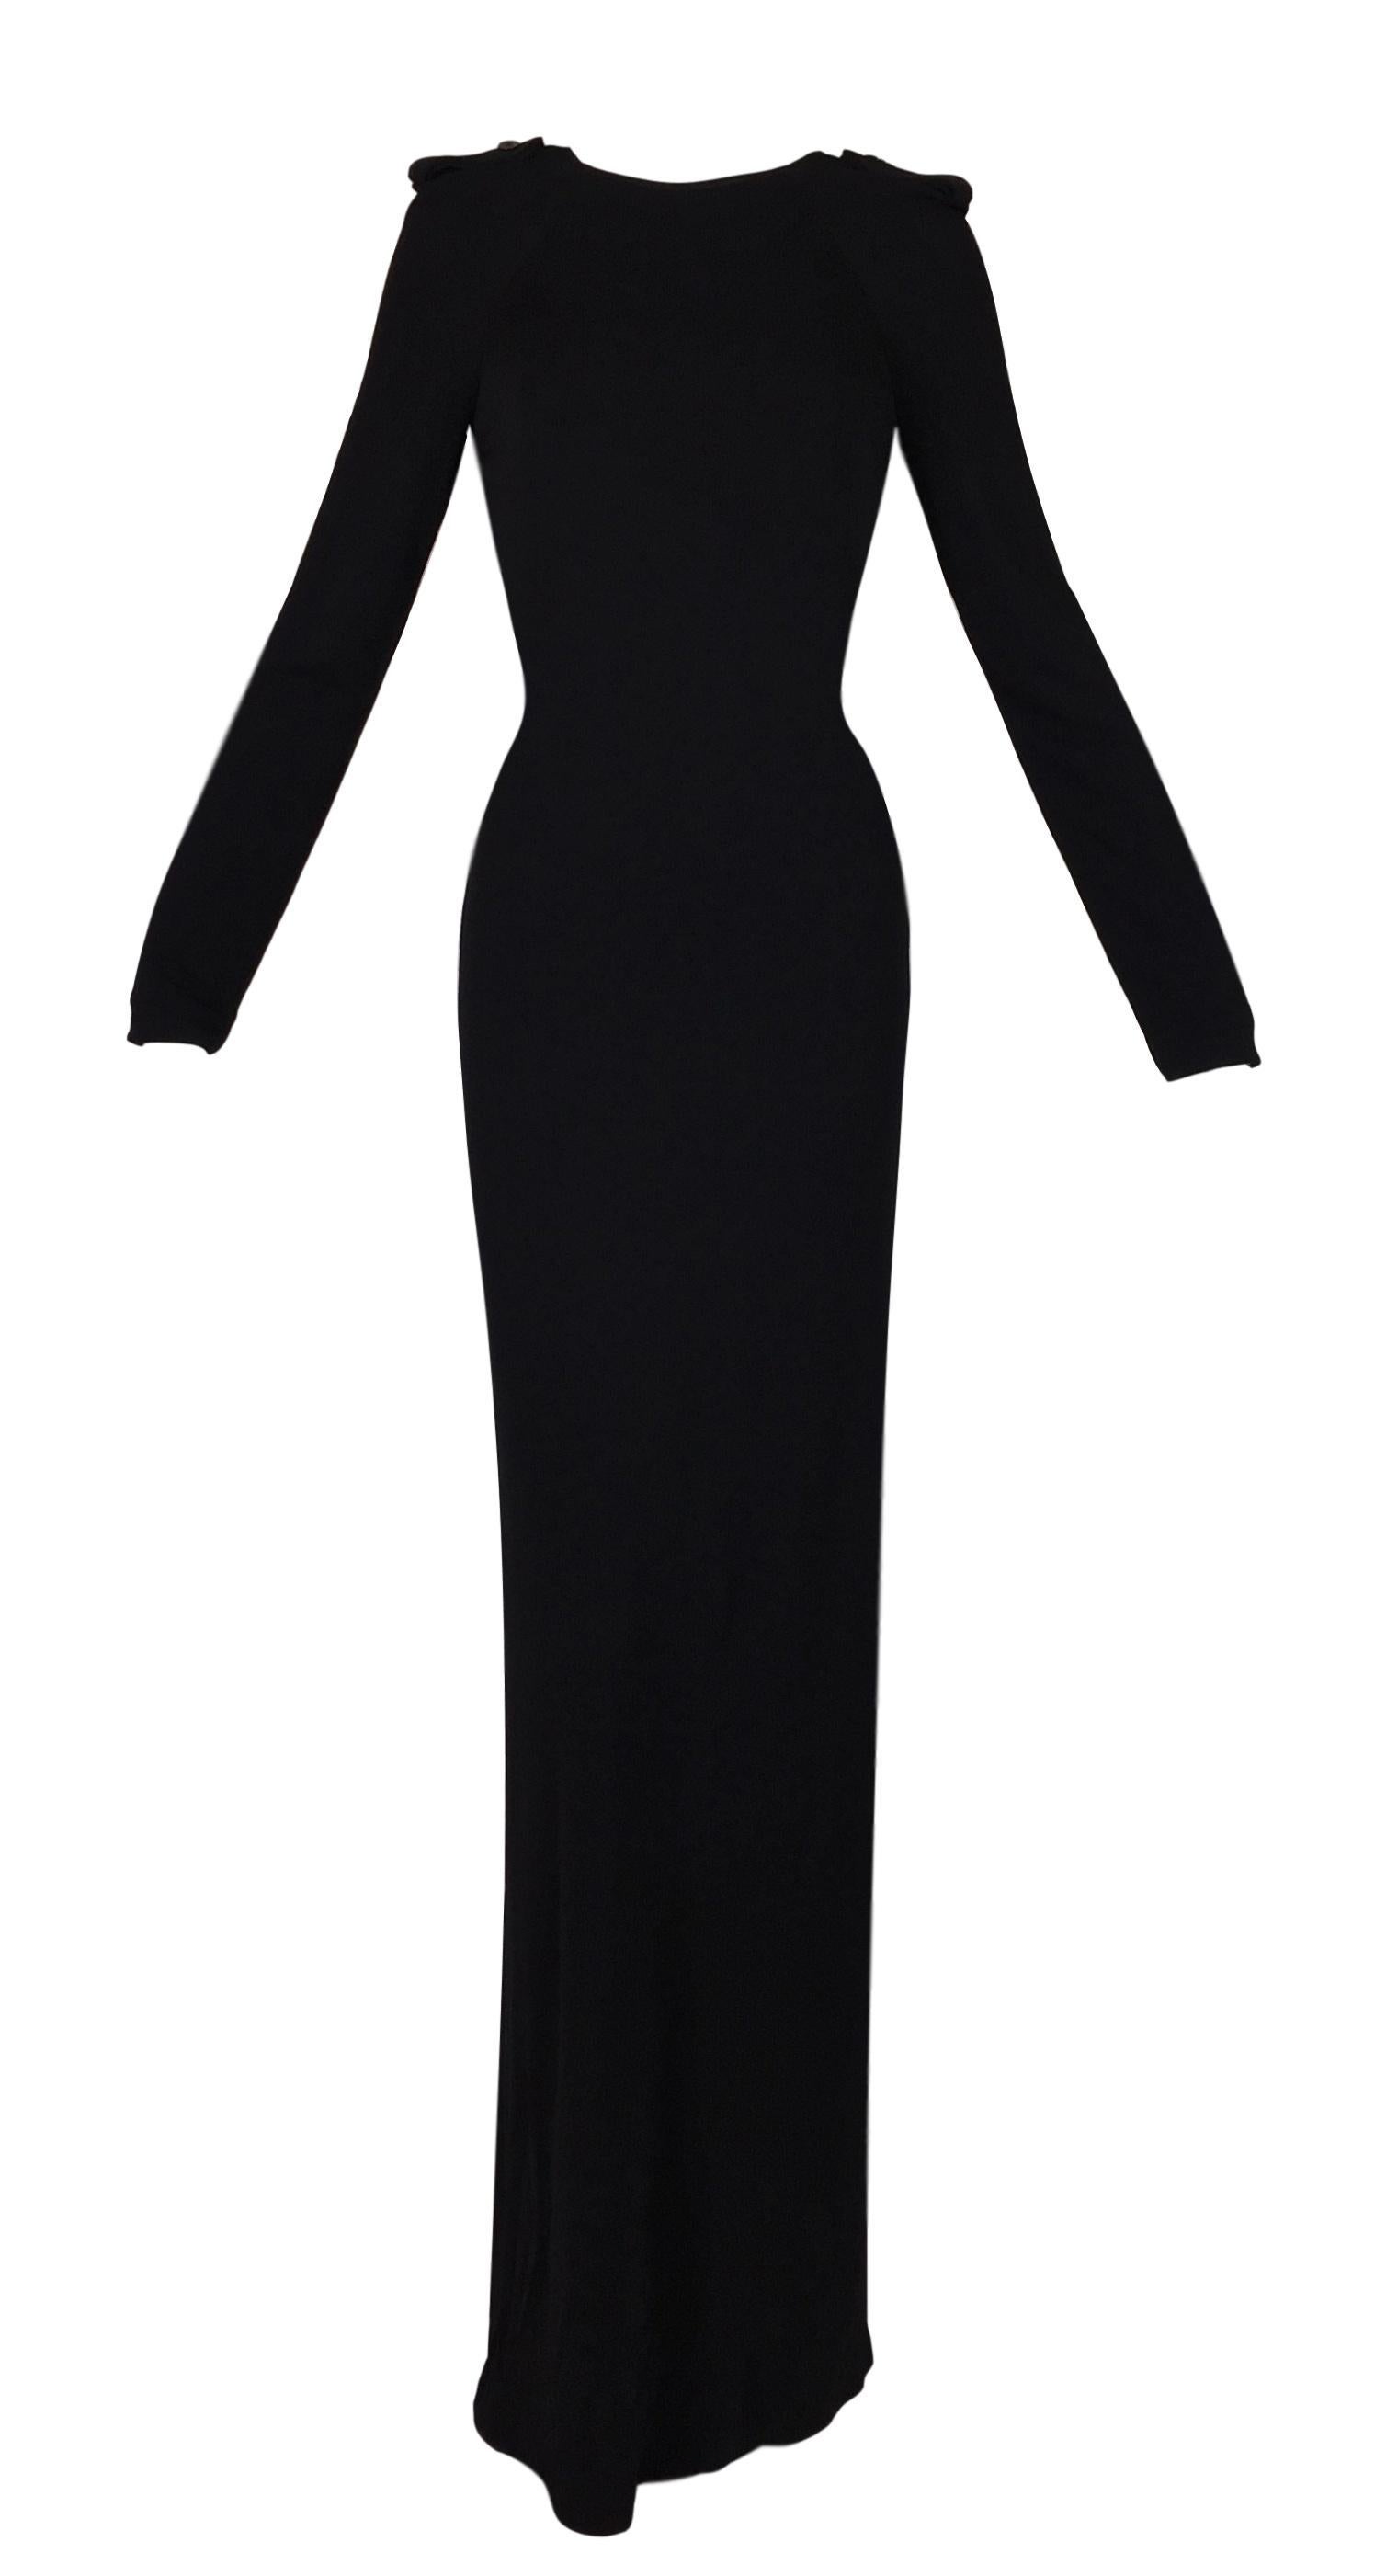 F/W 1996 Gucci Tom Ford Long Black Plunging Back Gown Dress w Pony Hair Belt In Good Condition In Yukon, OK